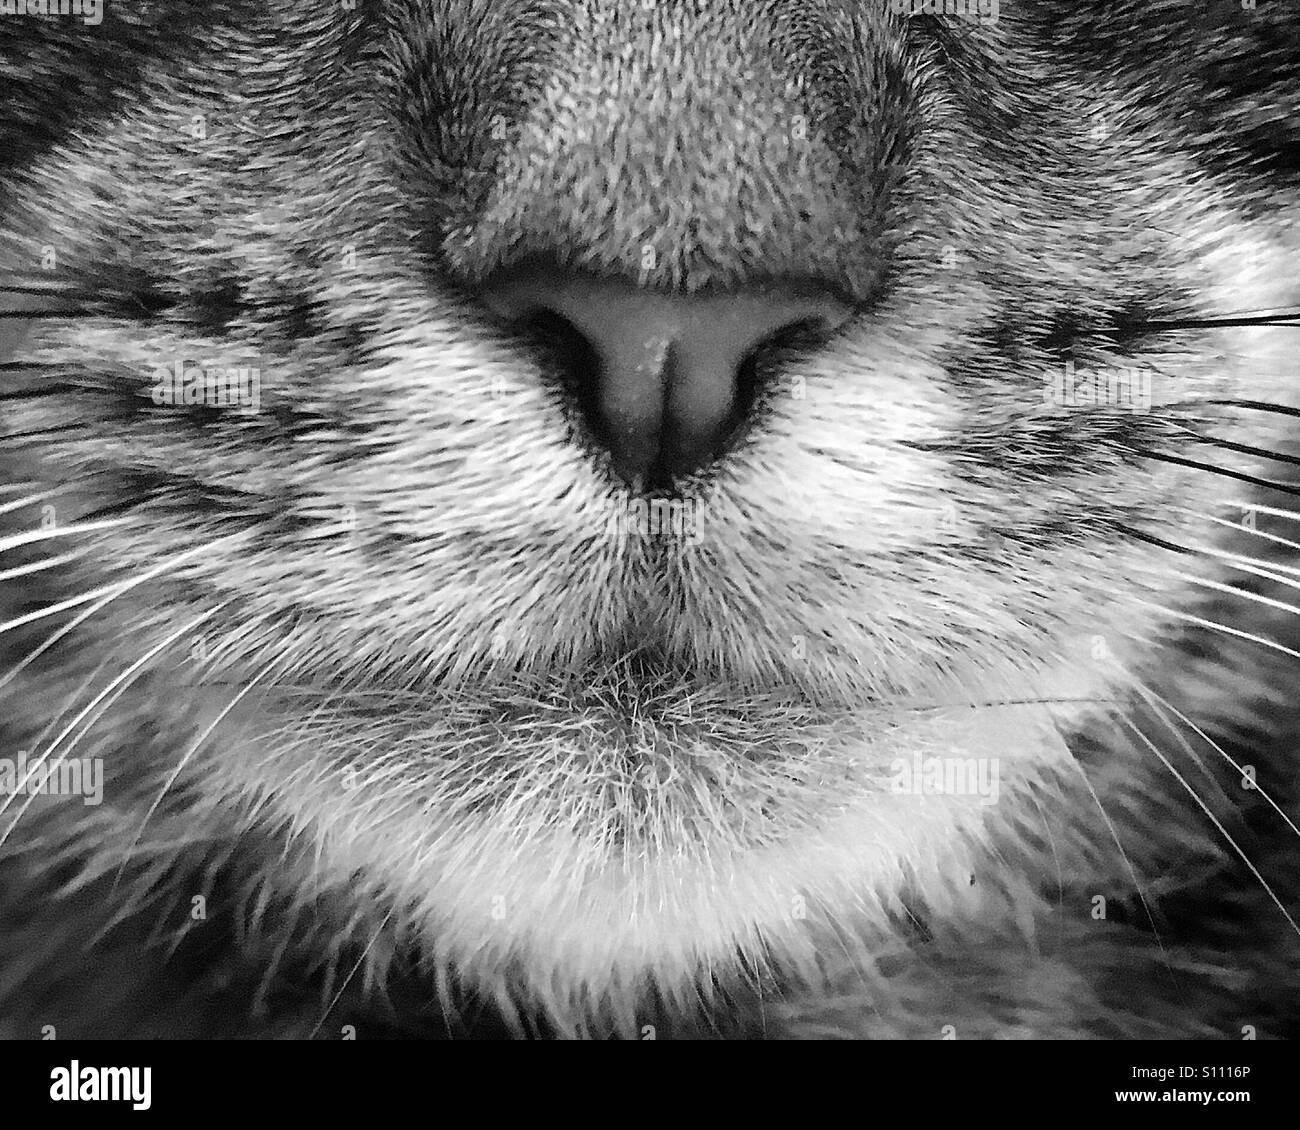 Kittens nose and whiskers up close black and white Stock Photo